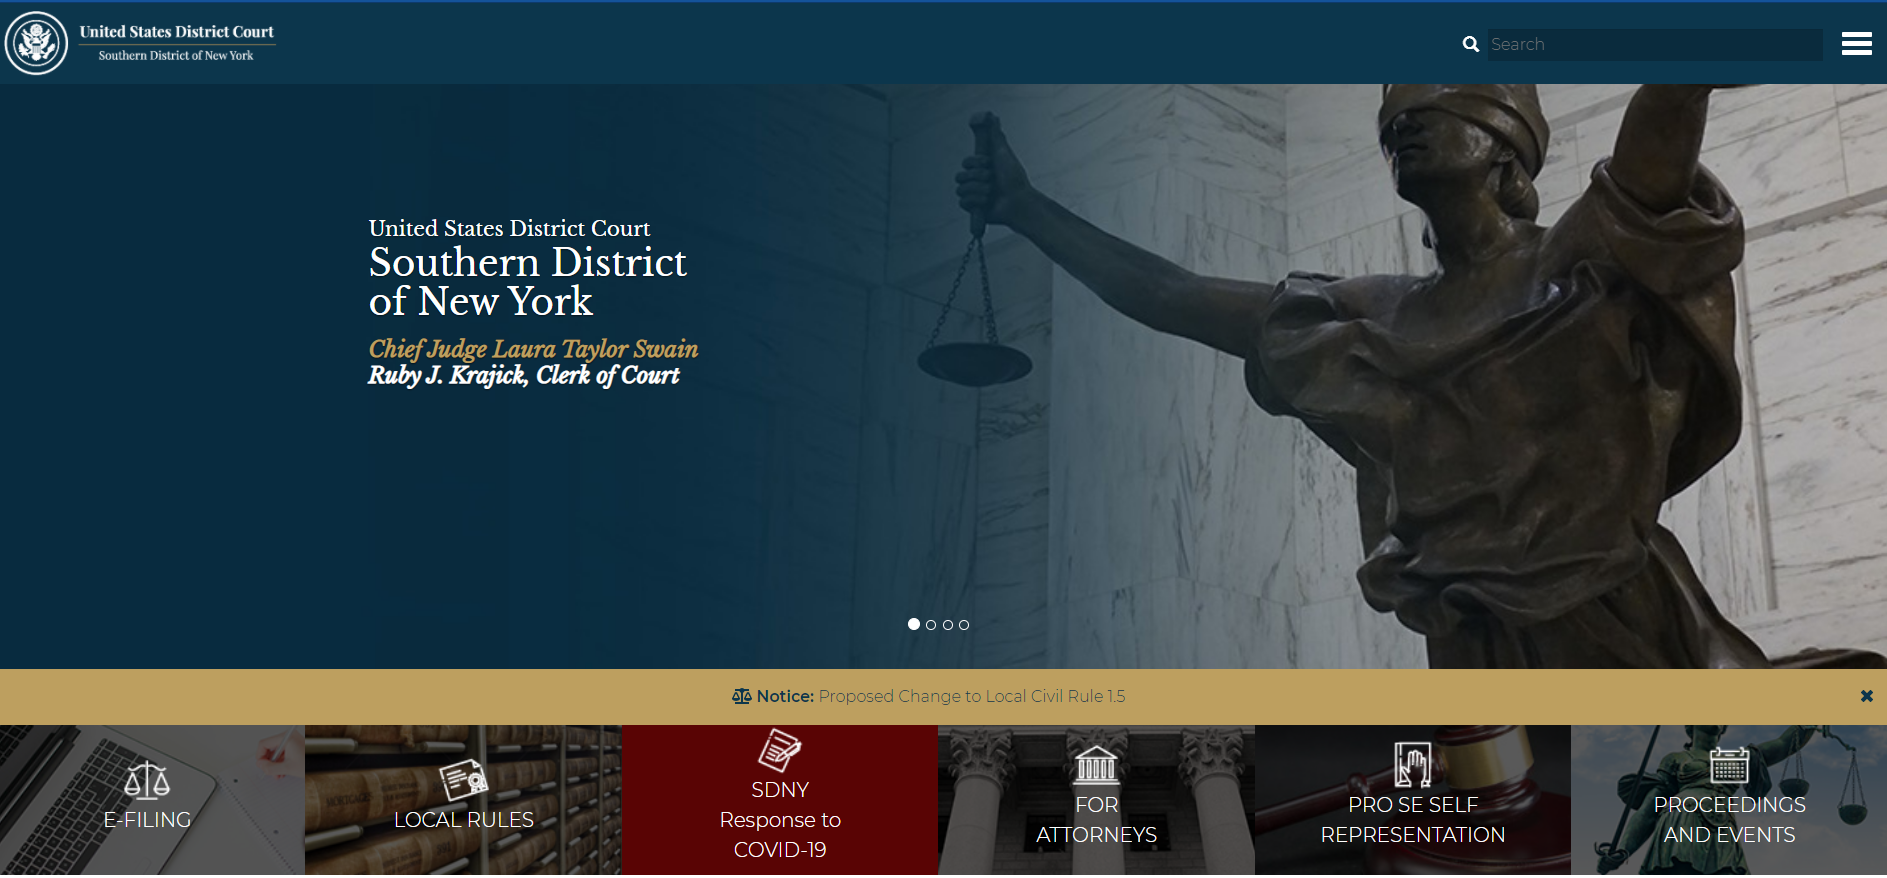 Southern District of New York website